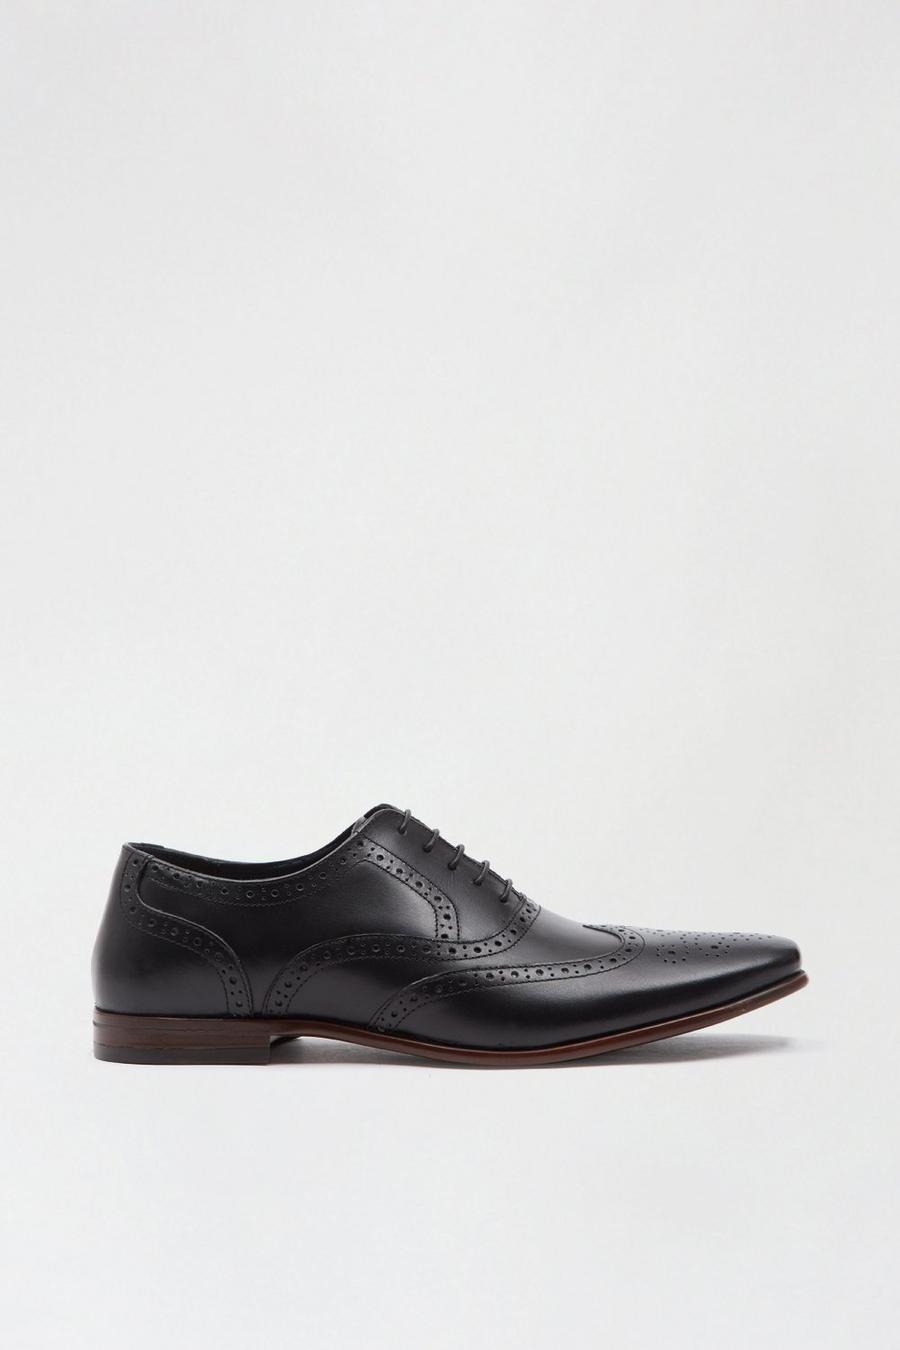 Black Leather Oxford Brogue Shoes